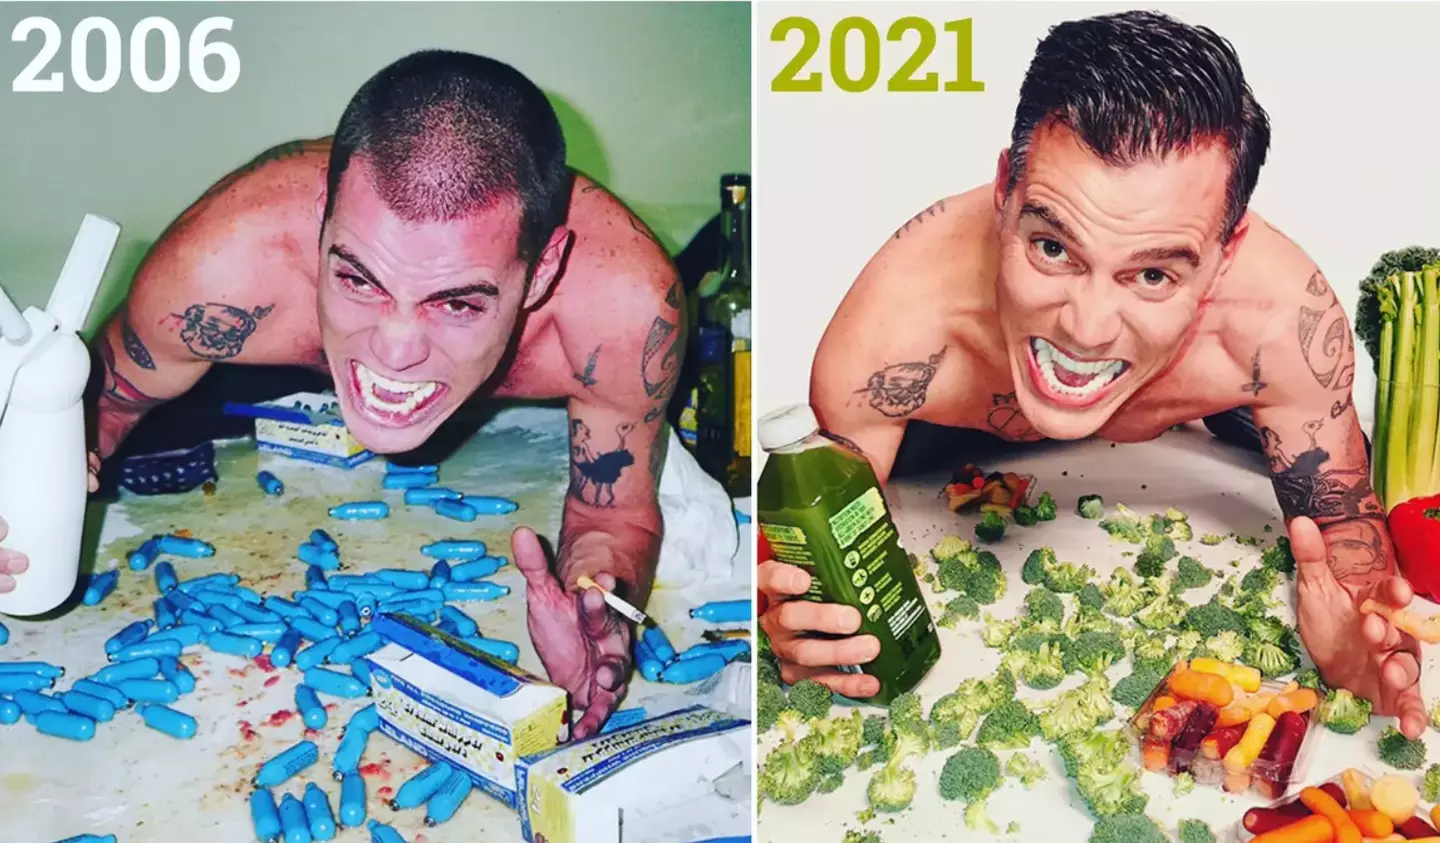 Quite the contrast - Steve-O gave up drugs in 2007.